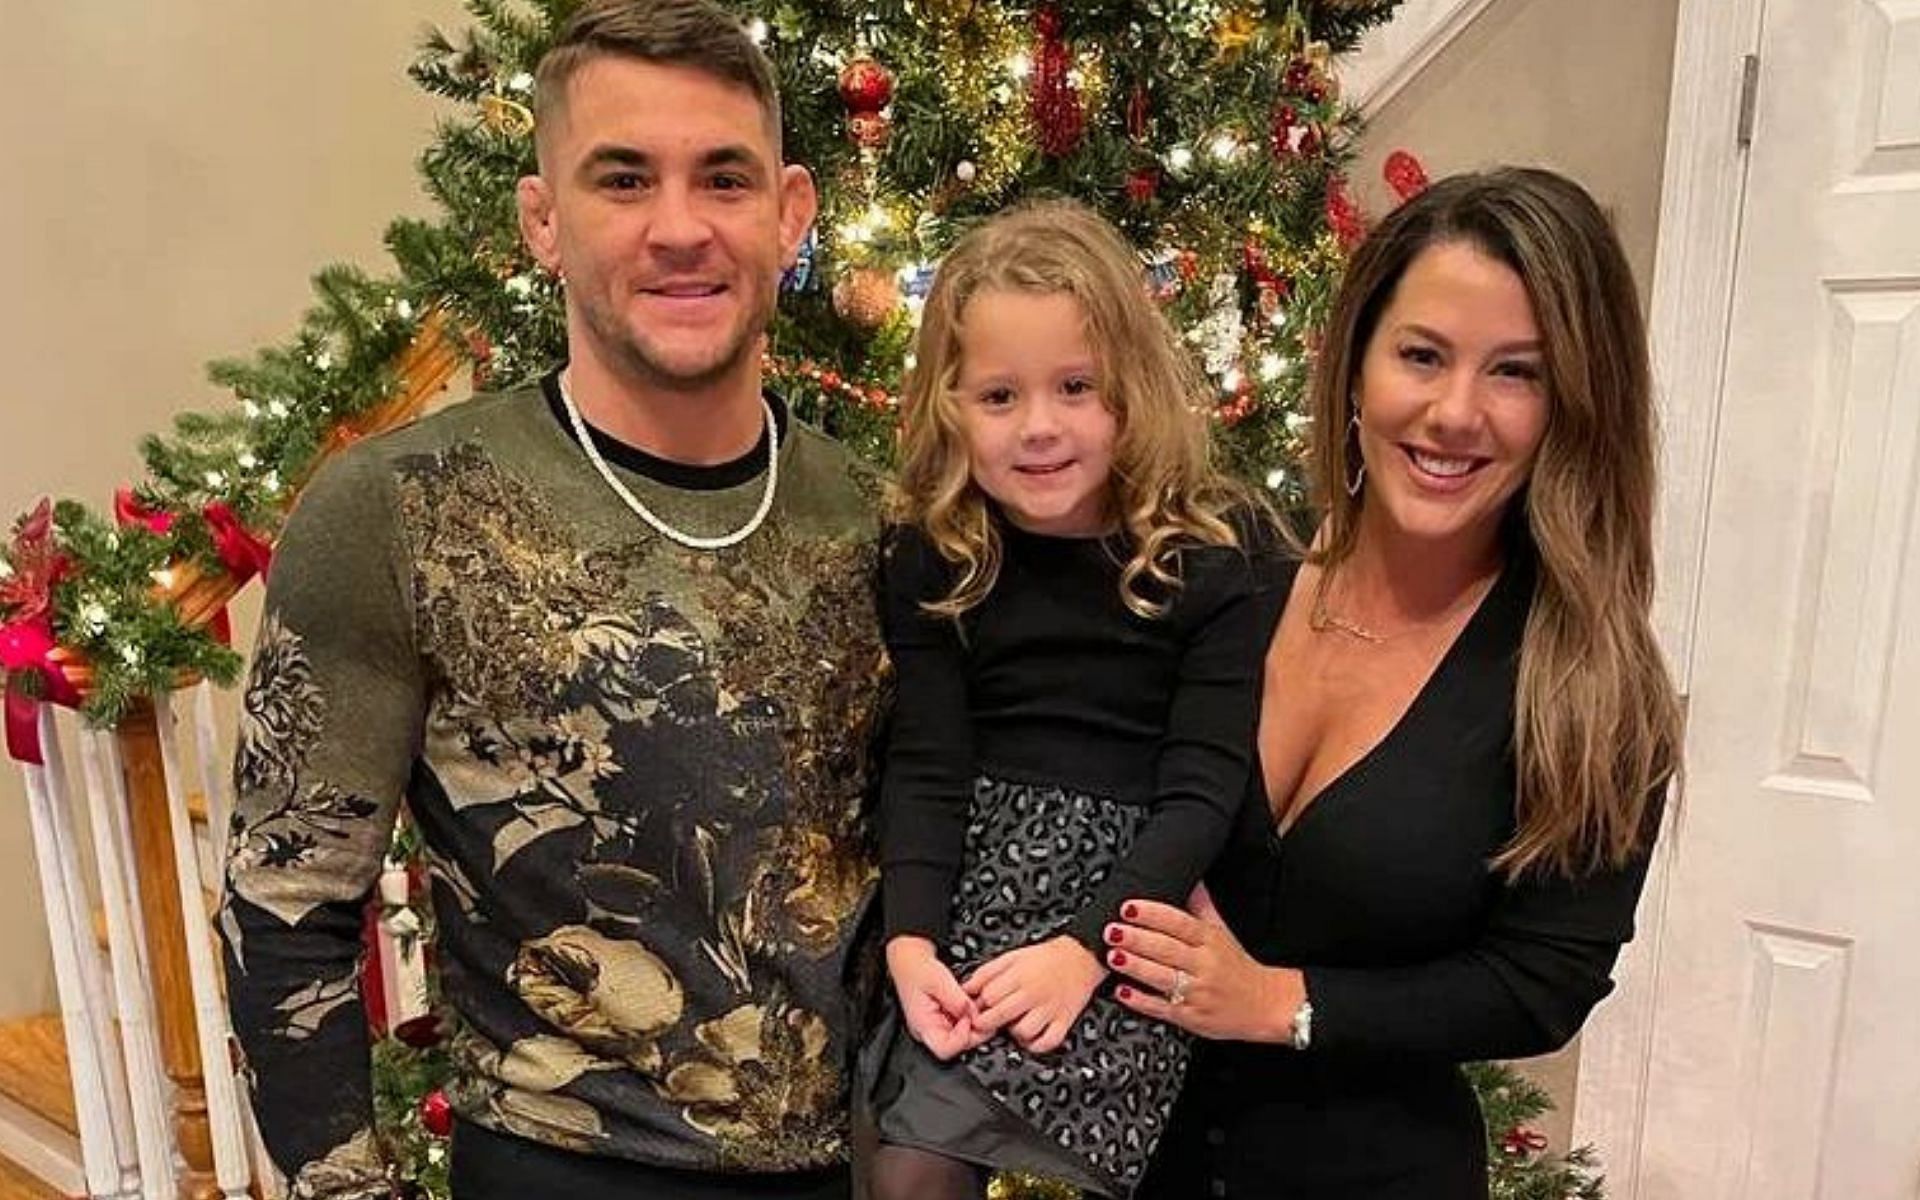 Dustin Poirier alongside his wife and daughter [Image courtesy of @dustinpoirier on Instagram]